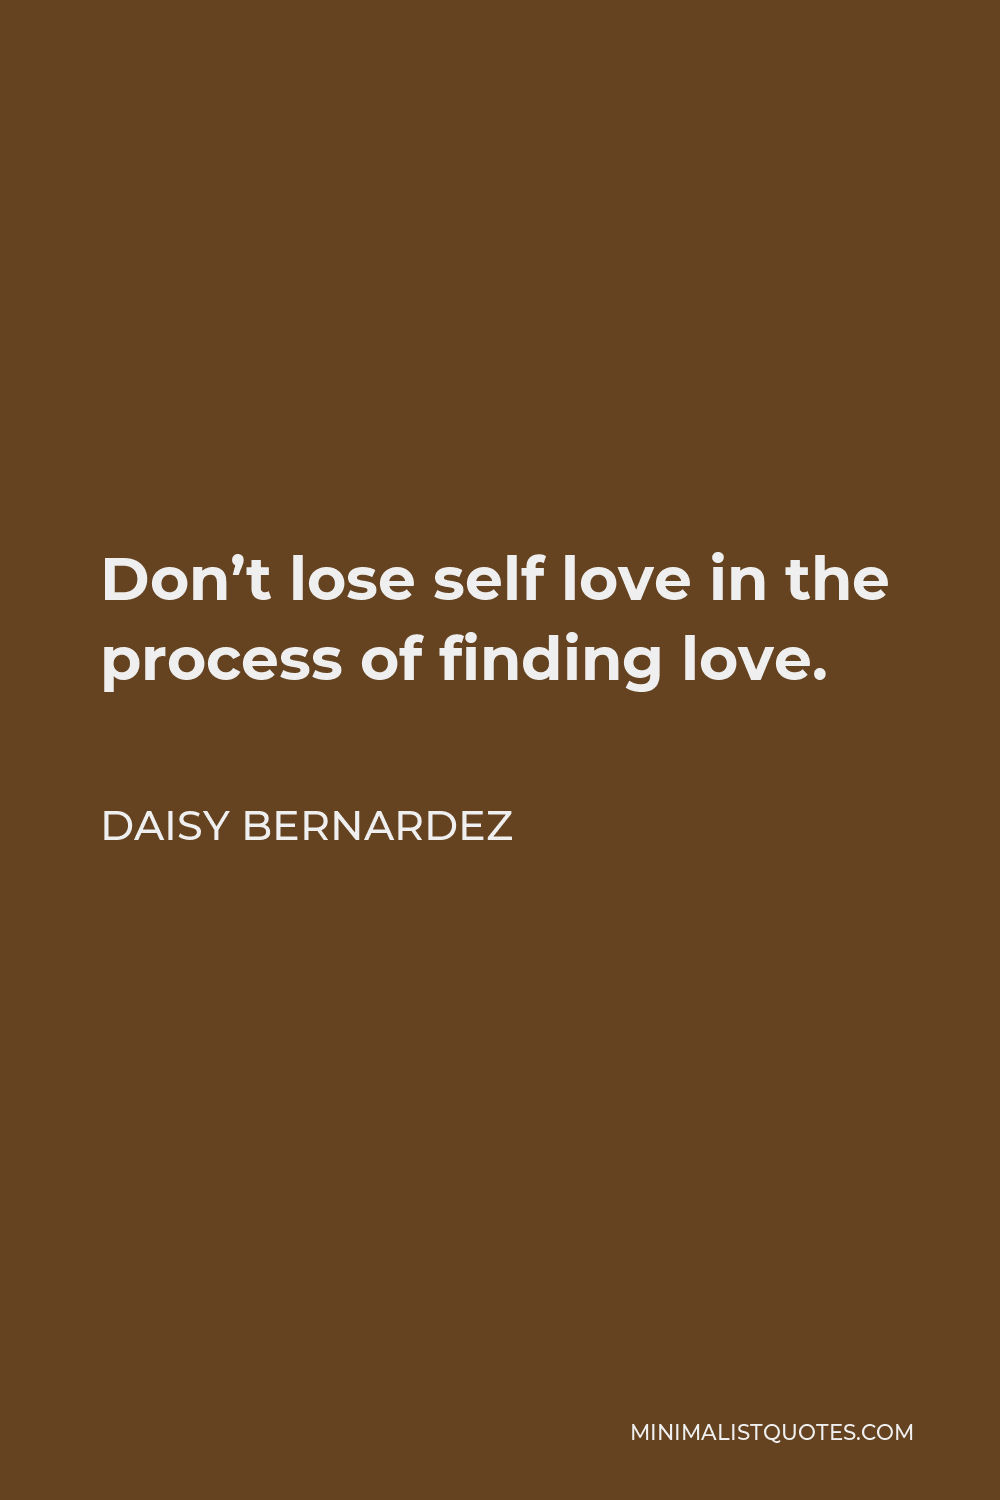 Daisy Bernardez Quote - Don’t lose self love in the process of finding love.